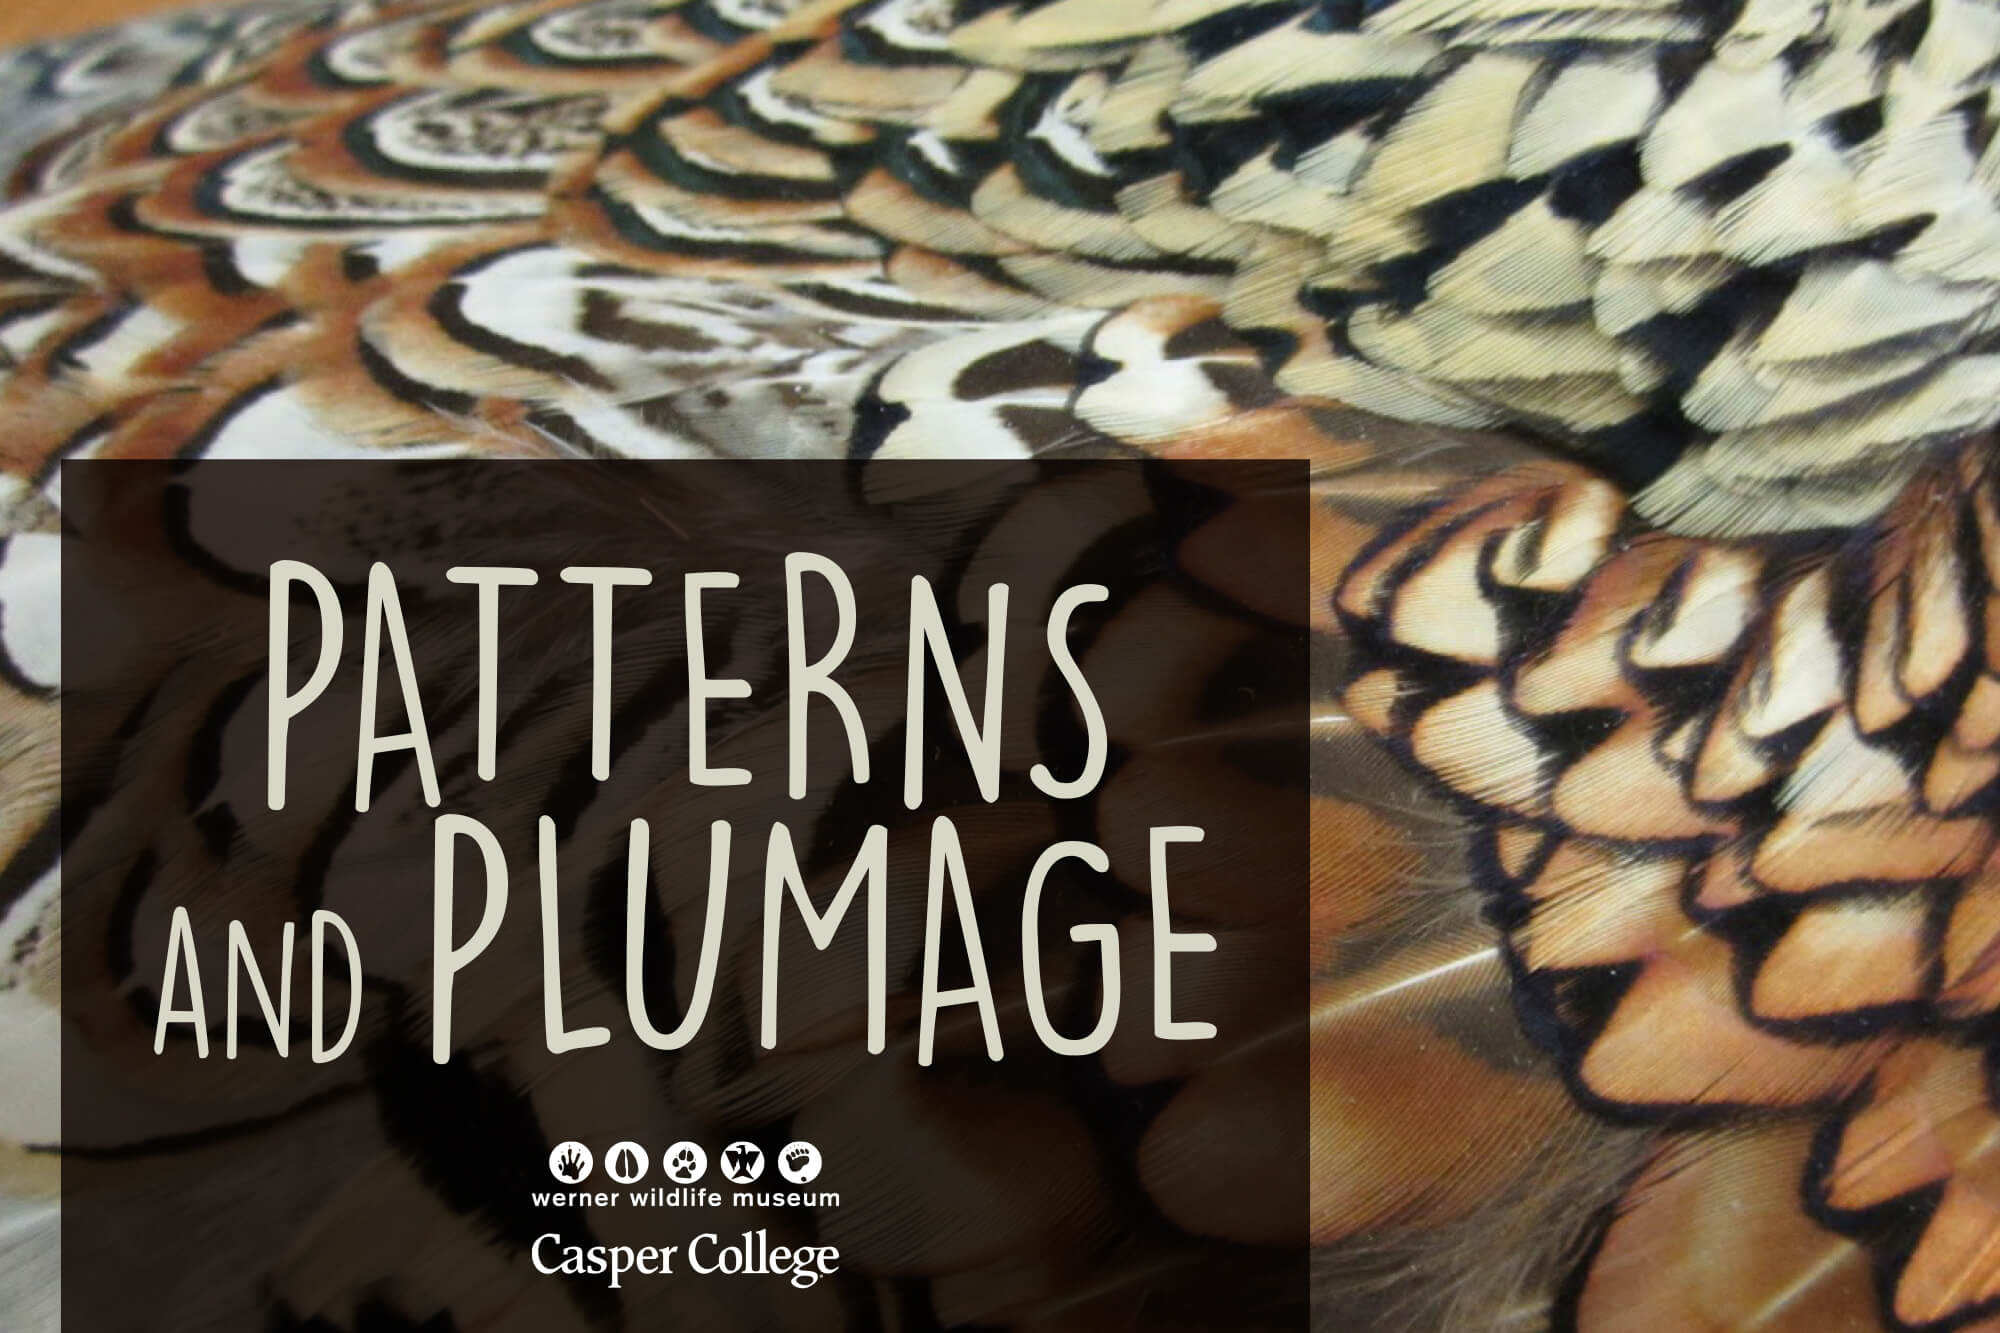 Image for "Patterns and Plumage" press release.